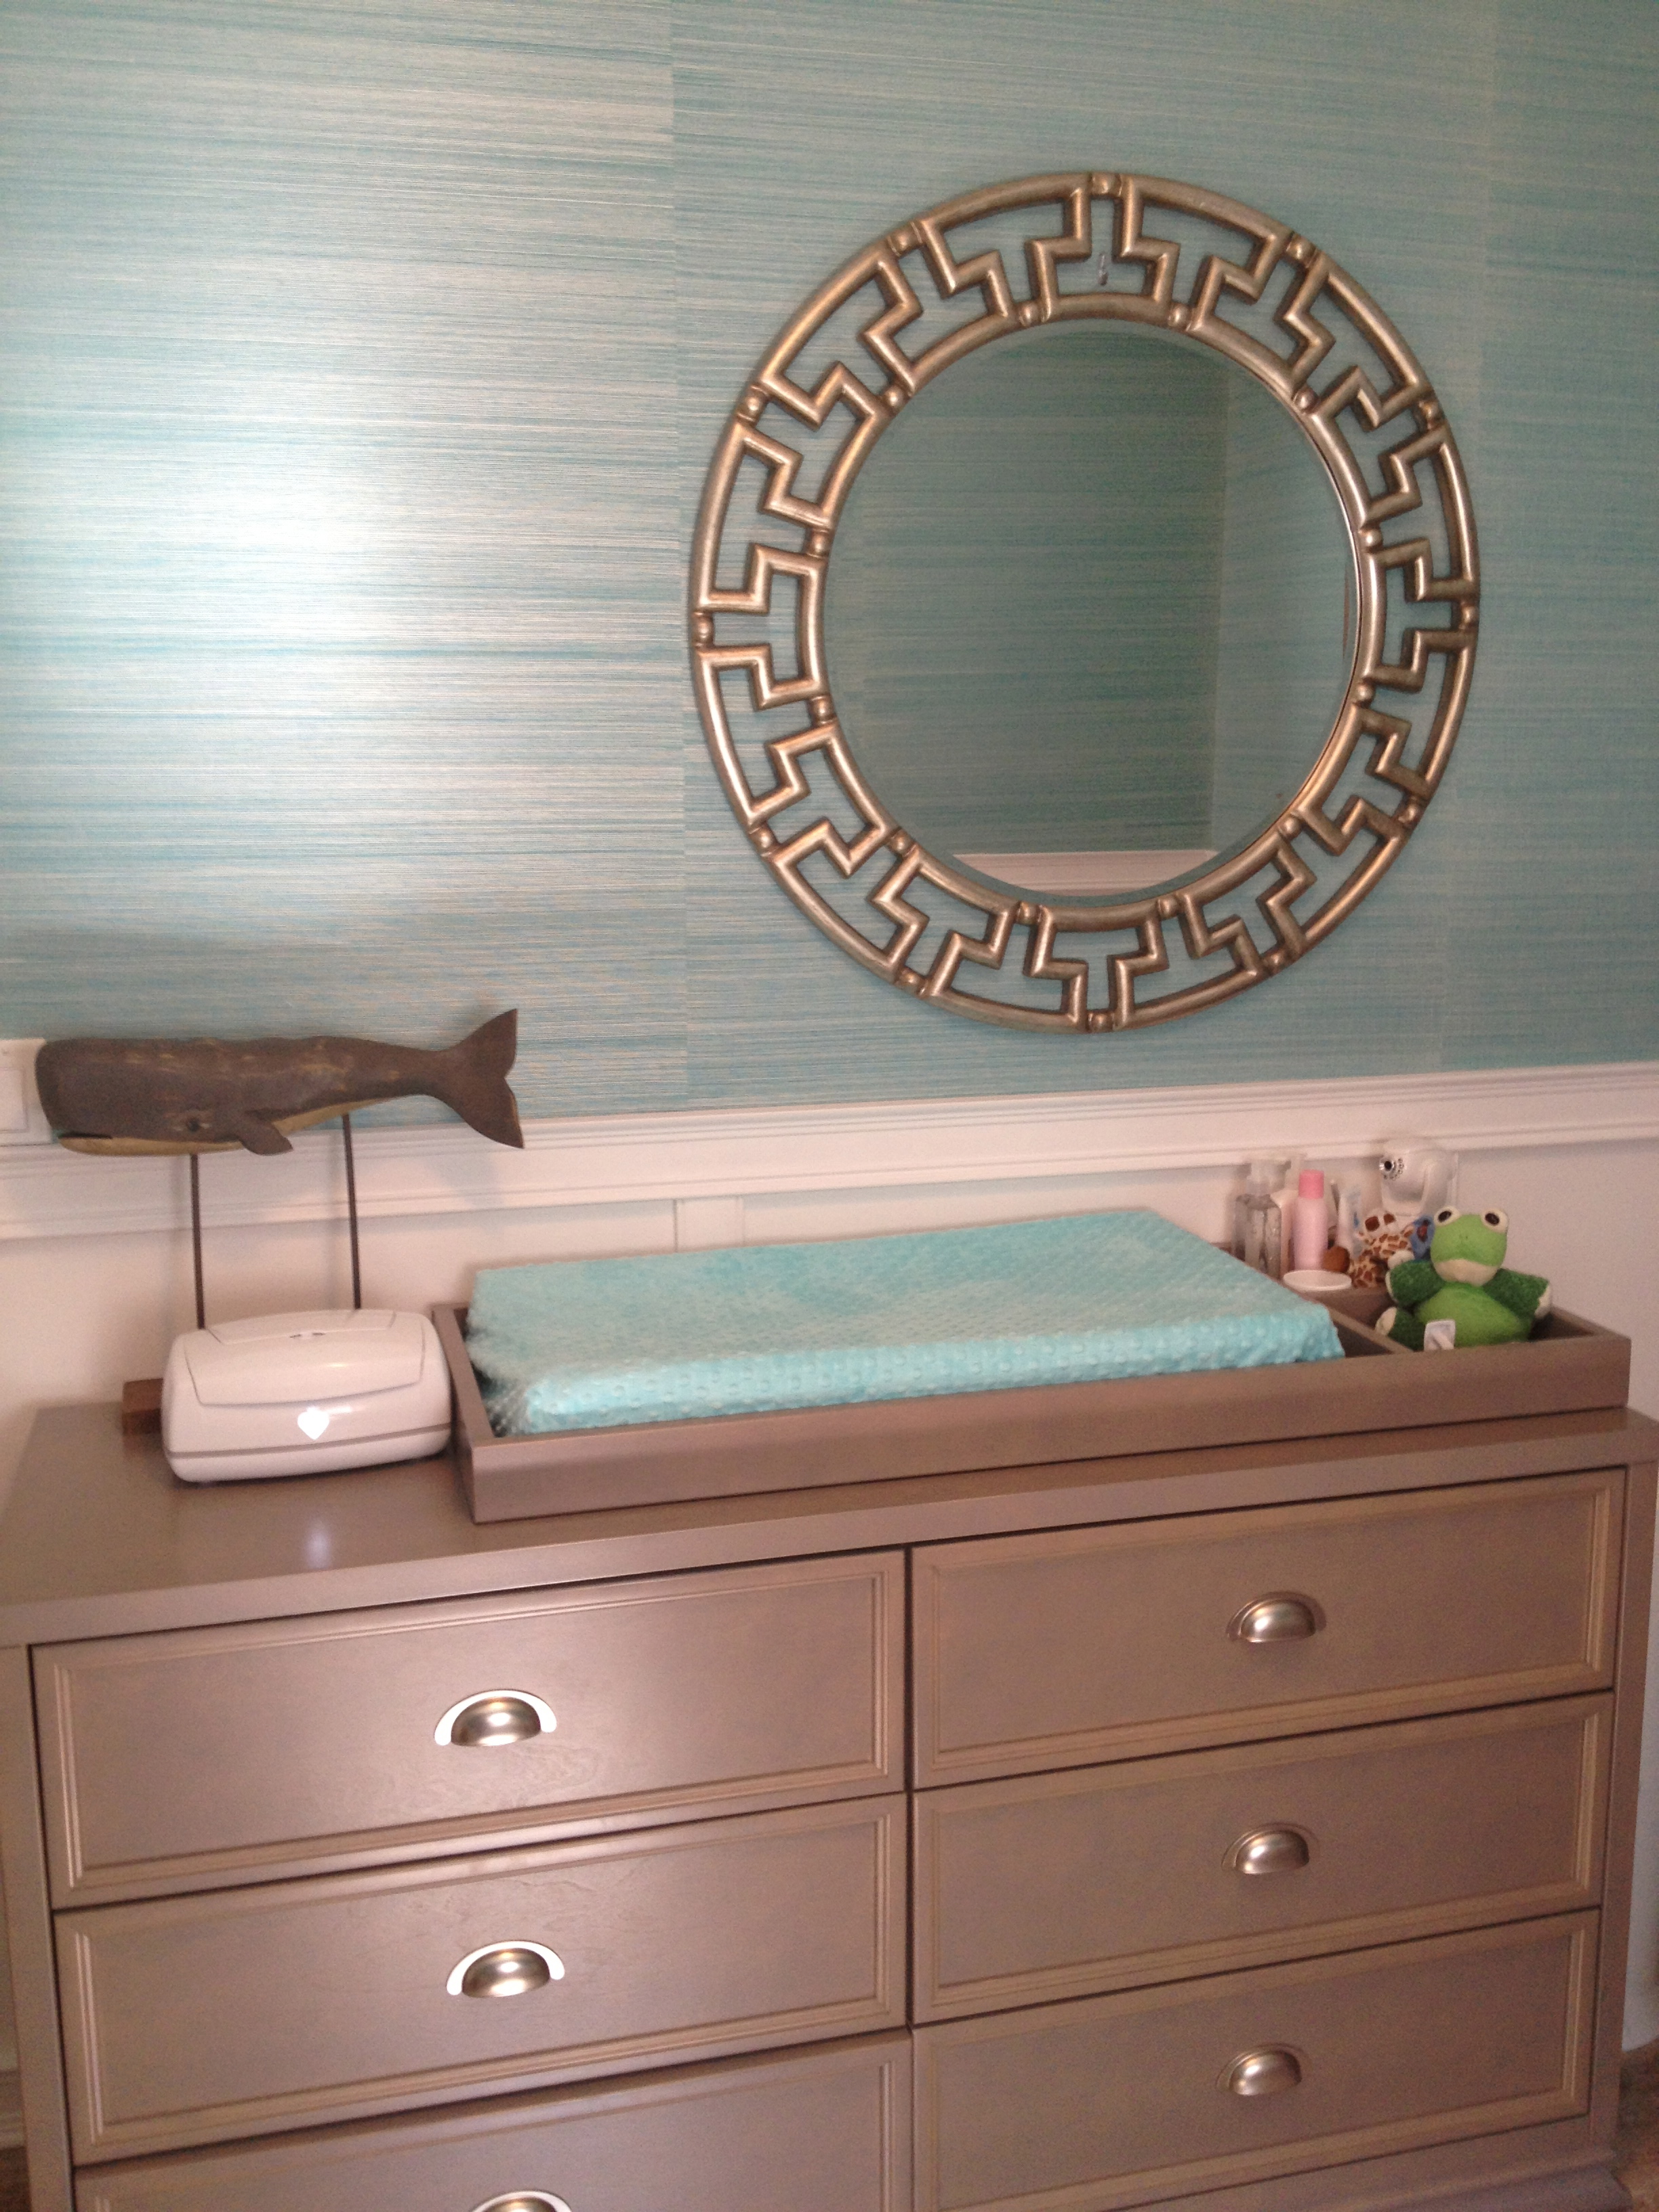 Blue Grasscloth Wall Paper in this Coastal Inspired Nursery